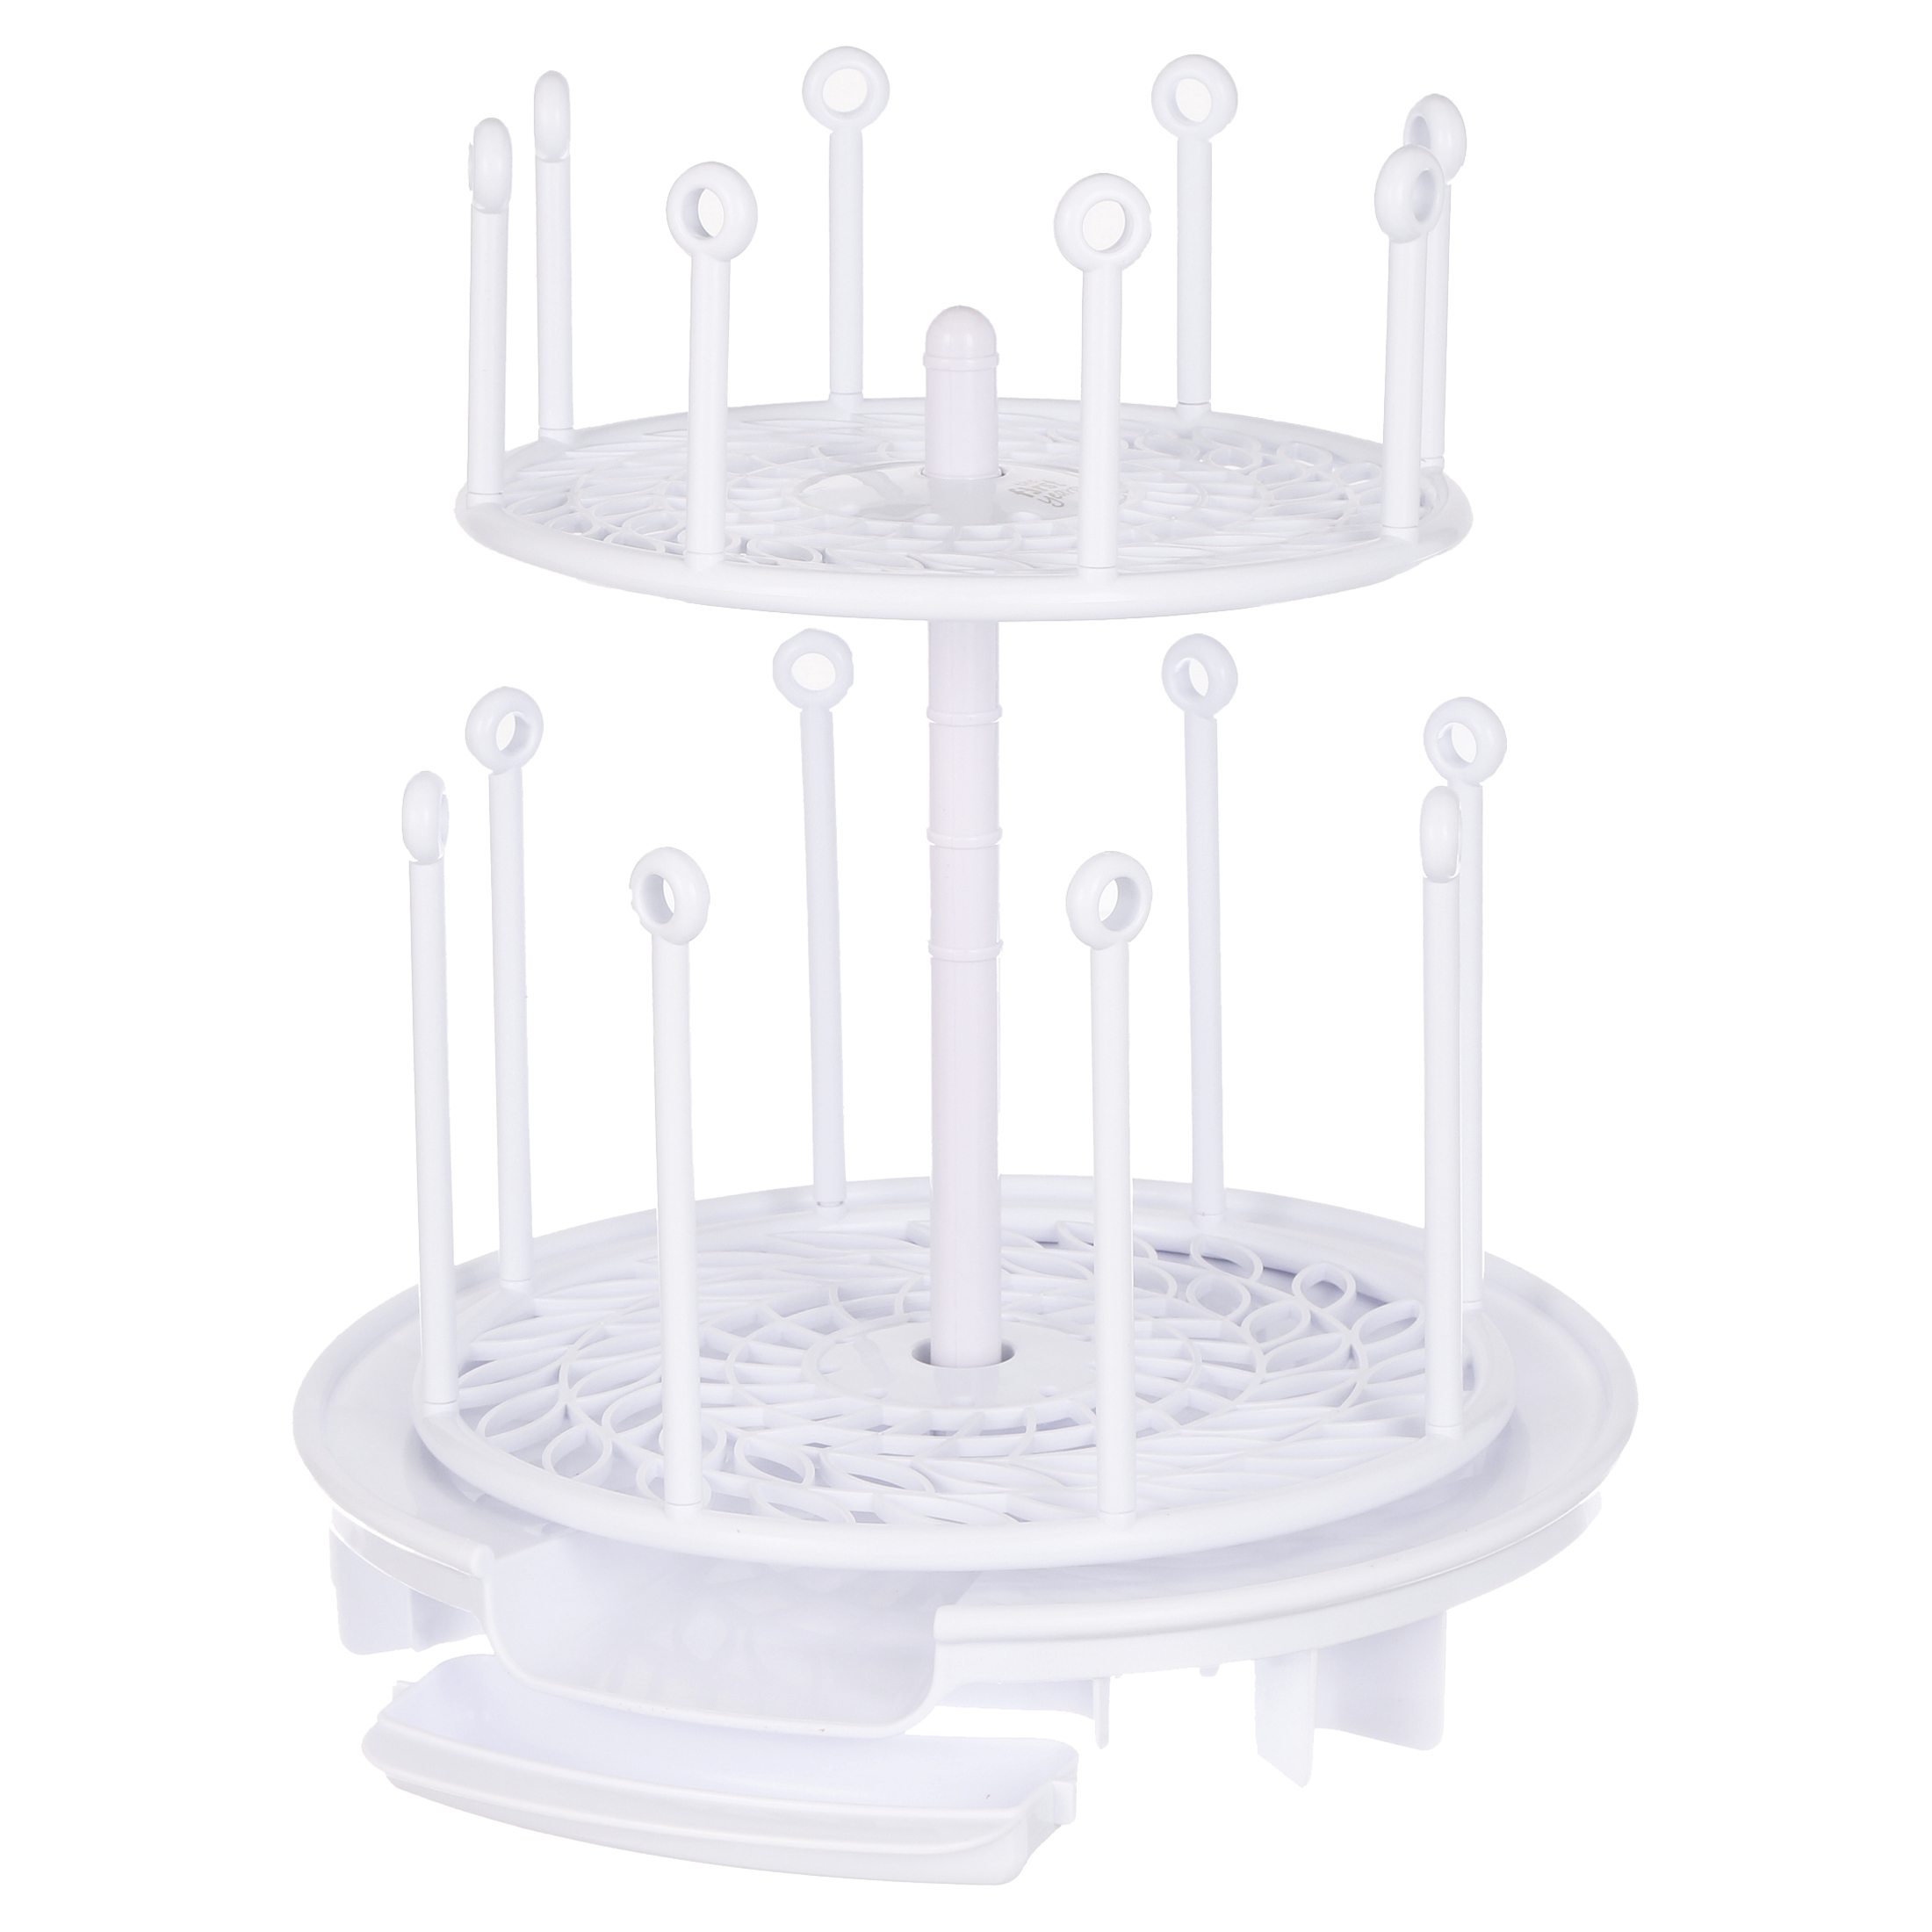 The First Years Spin Stack Drying Rack – Kitchen Countertop Dish Rack for Baby Bottles and Other Baby Essentials – White - image 3 of 10